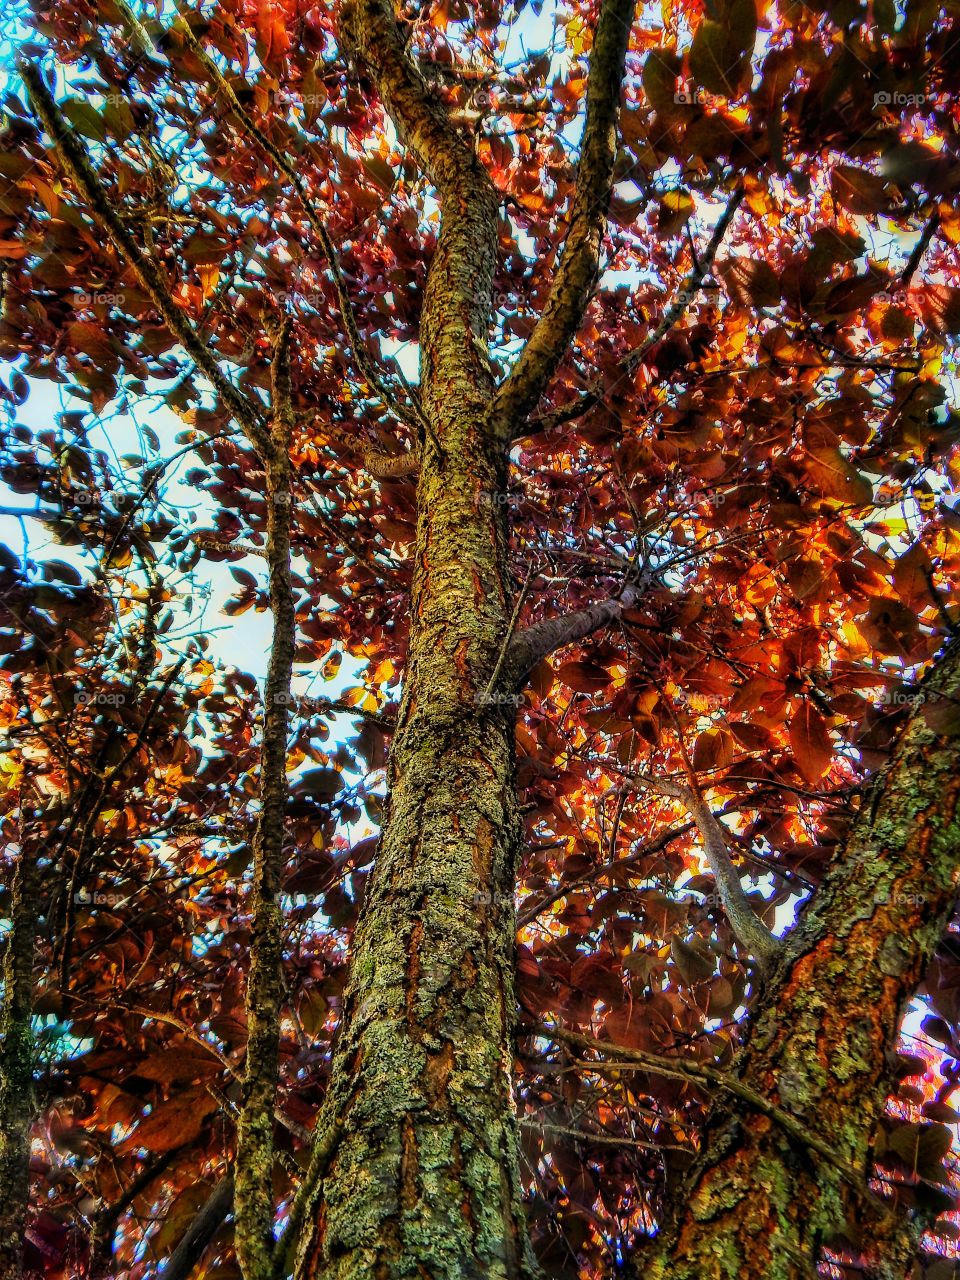 early fall tree with orange and red leaves under tree looking up pov